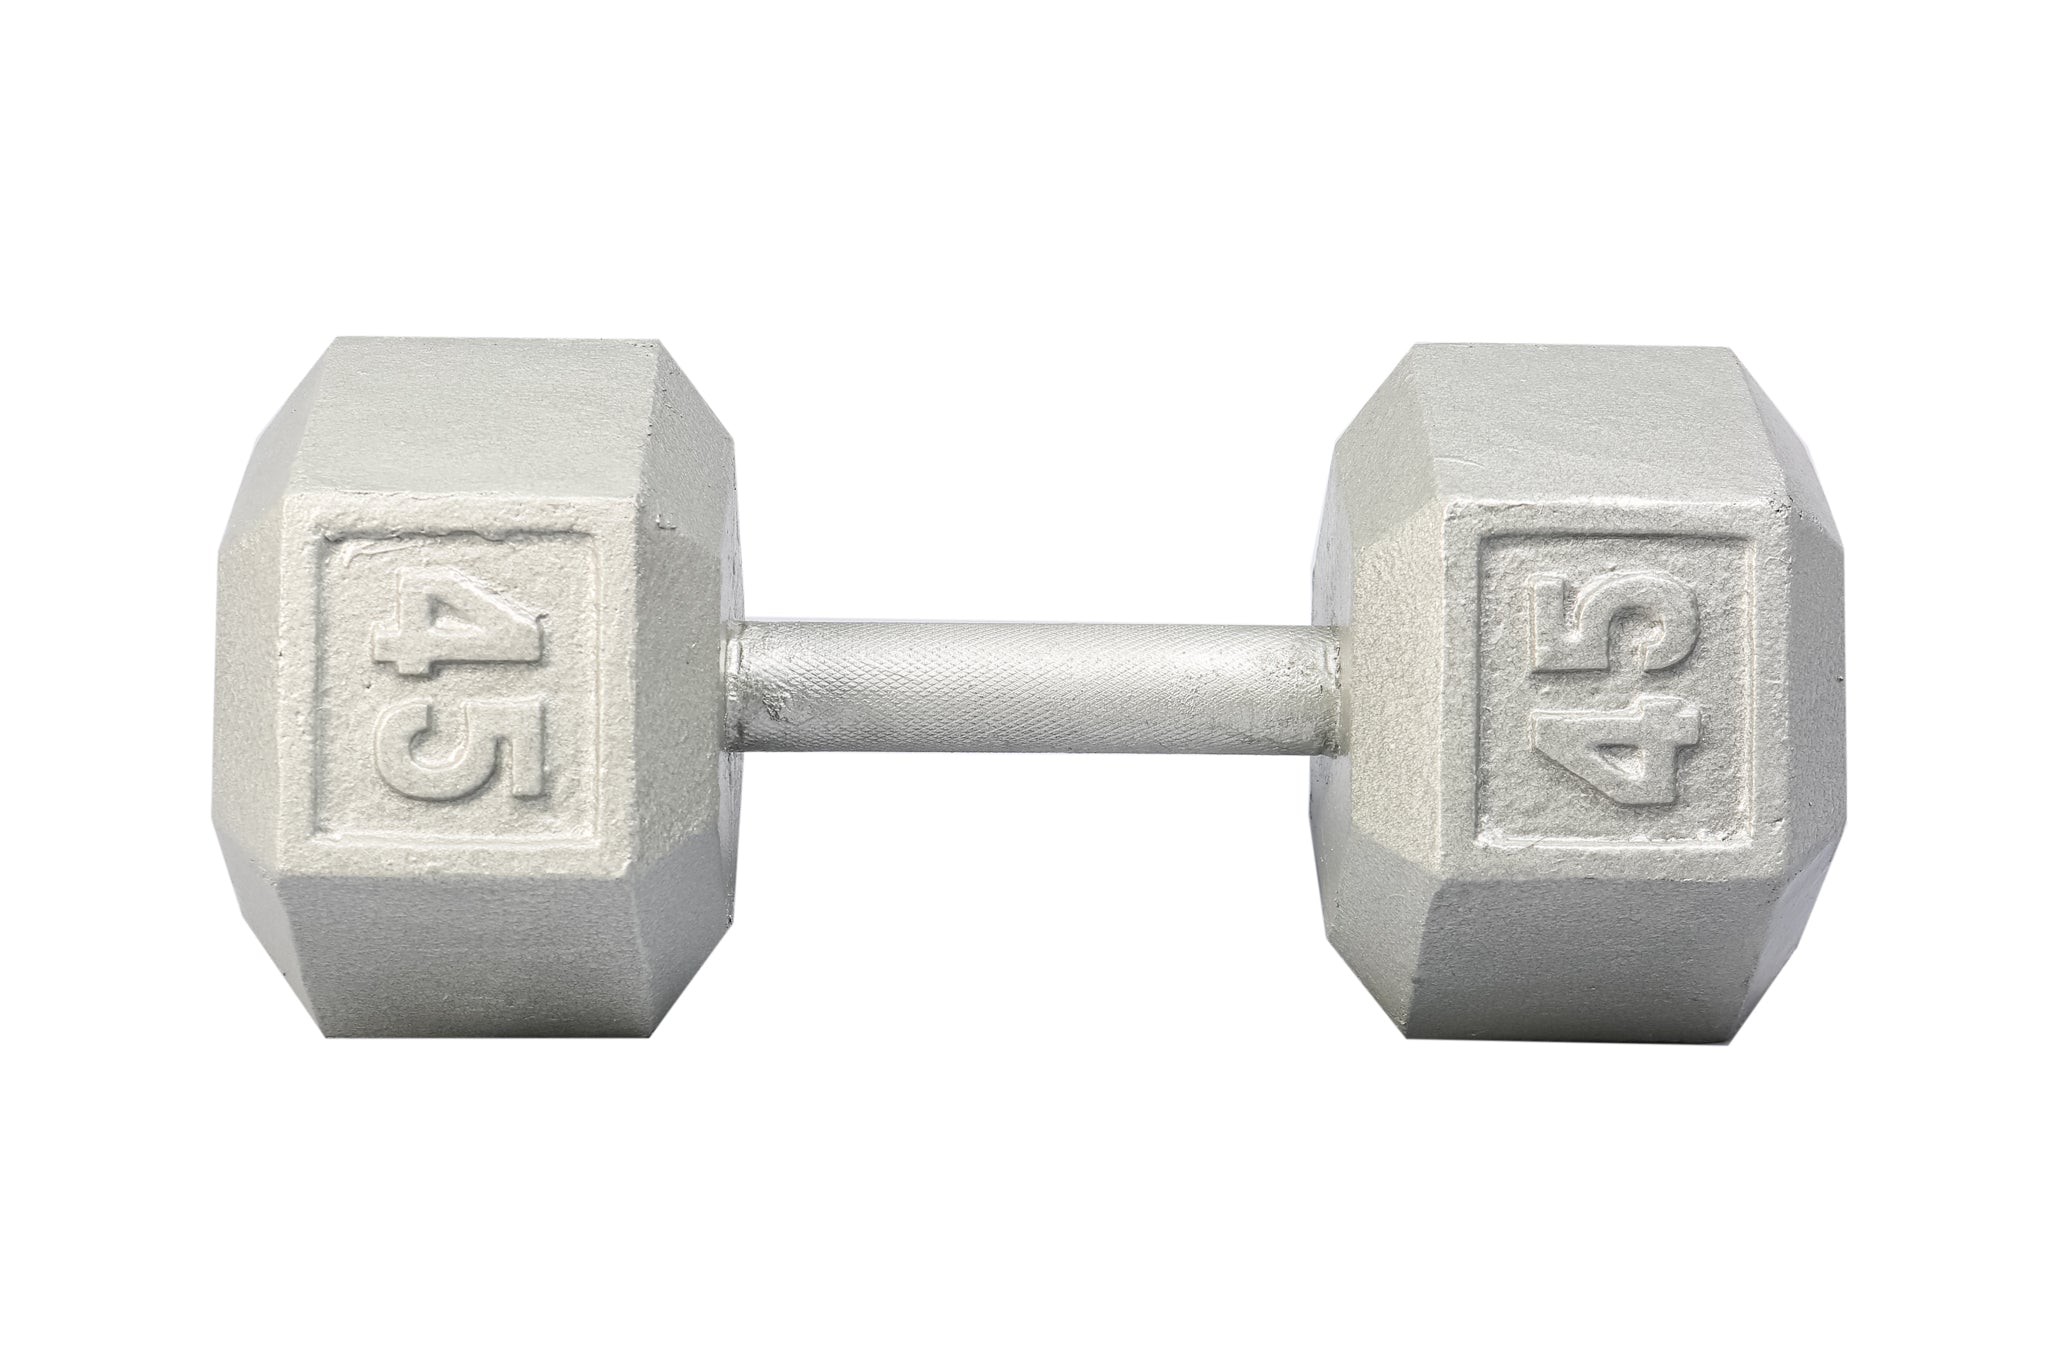 York Barbell | Dumbbells - Cast Iron Hex - XTC Fitness - Exercise Equipment Superstore - Canada - Cast Iron Hex